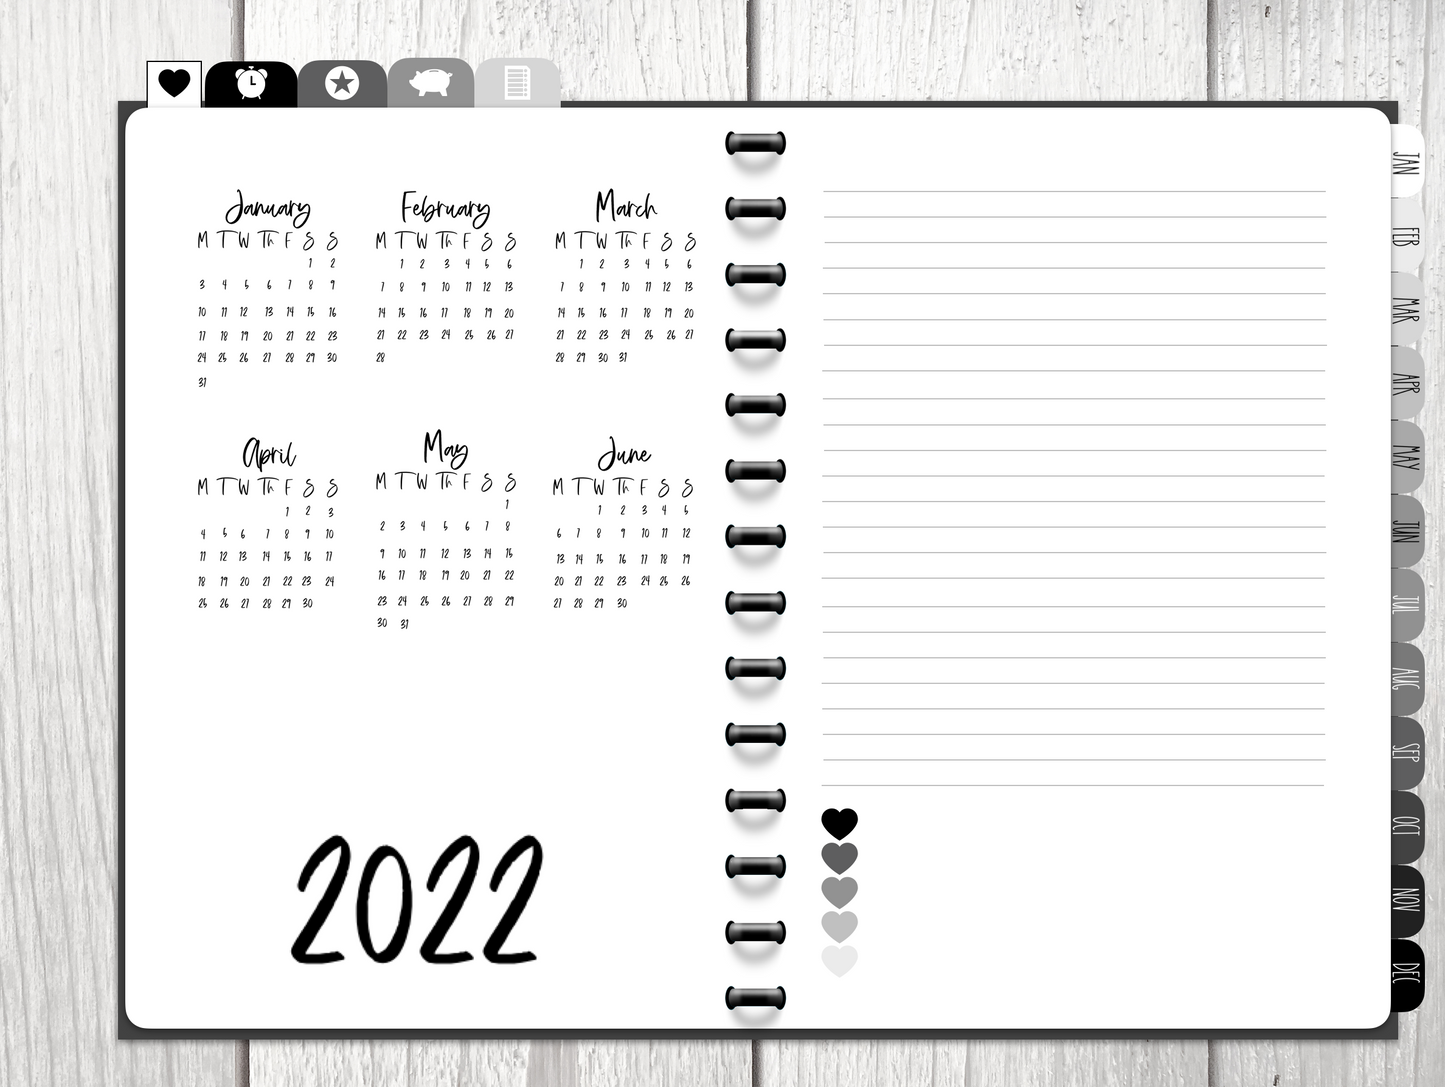 Happy Heart Shades of Gray Digital Planner- dated August 2021- July 2022